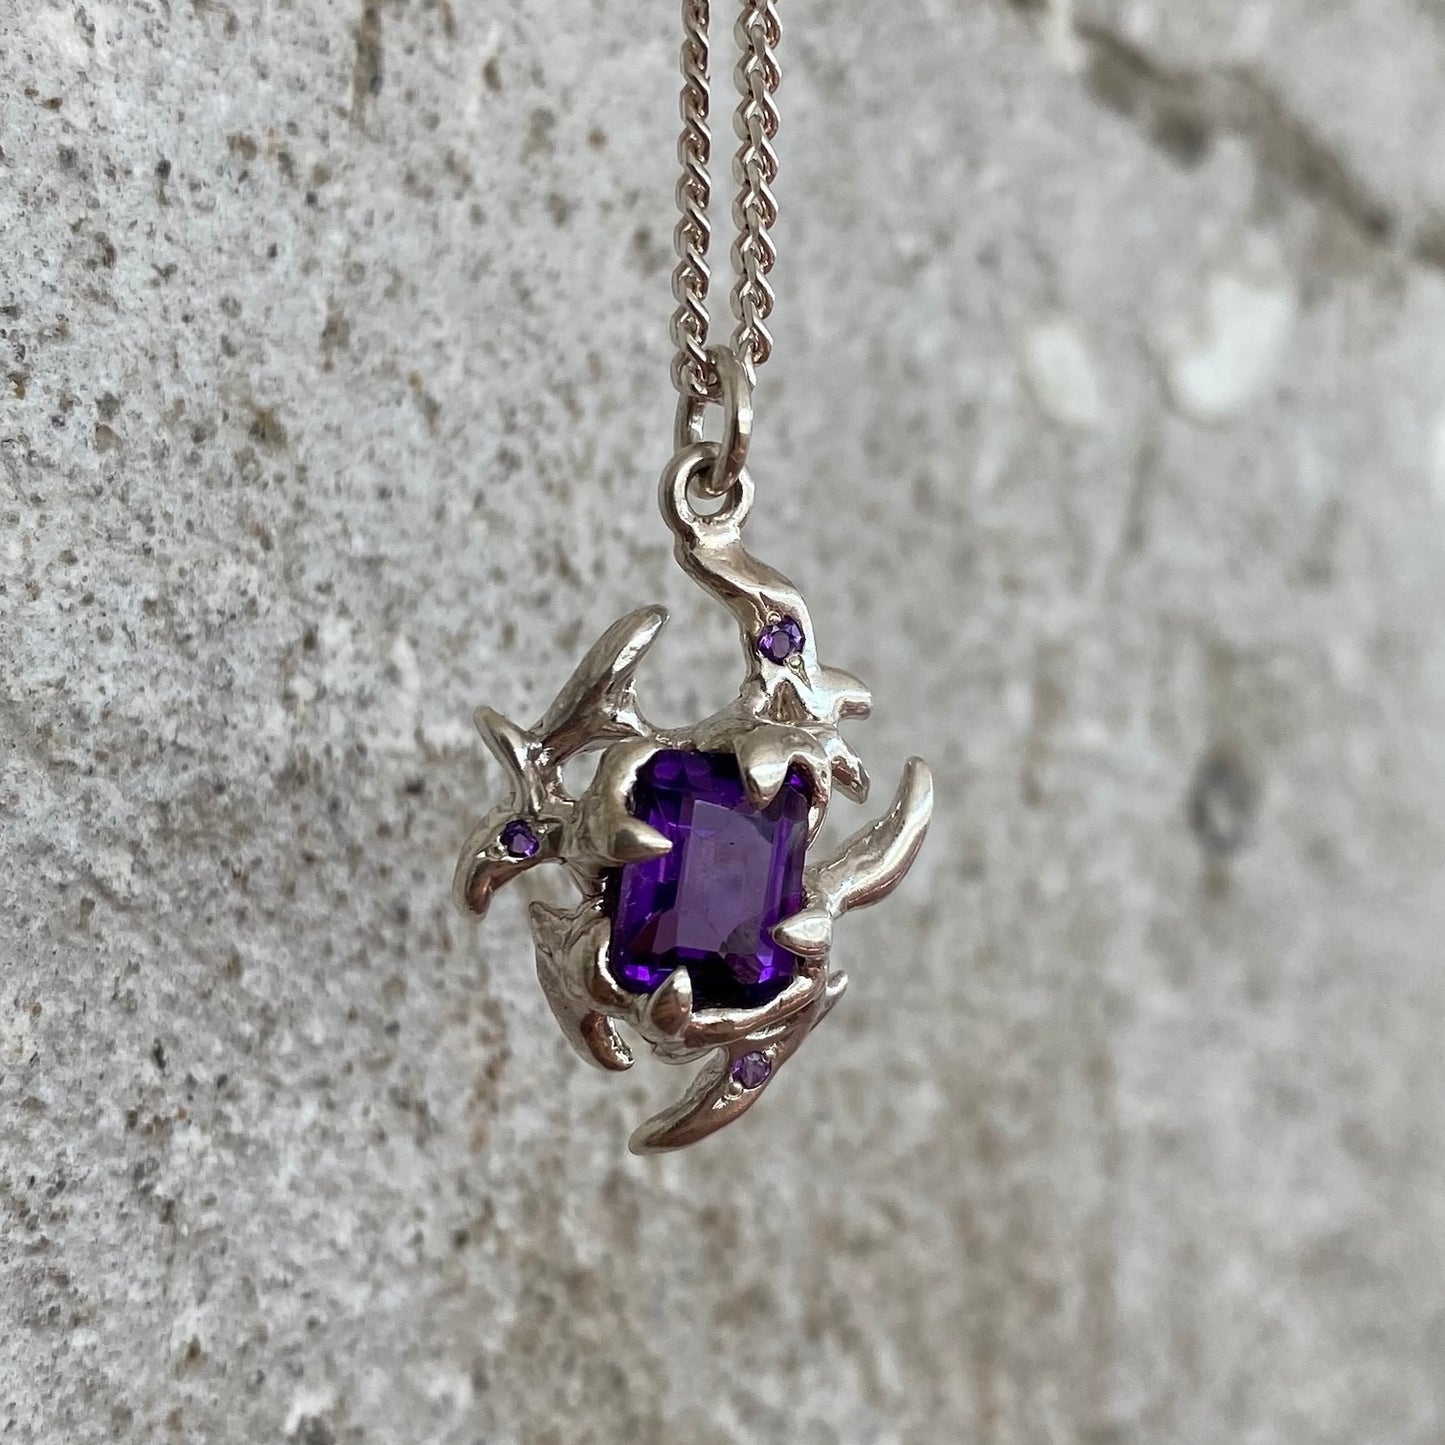 Maxi KHAOS sterling silver and amethyst necklace